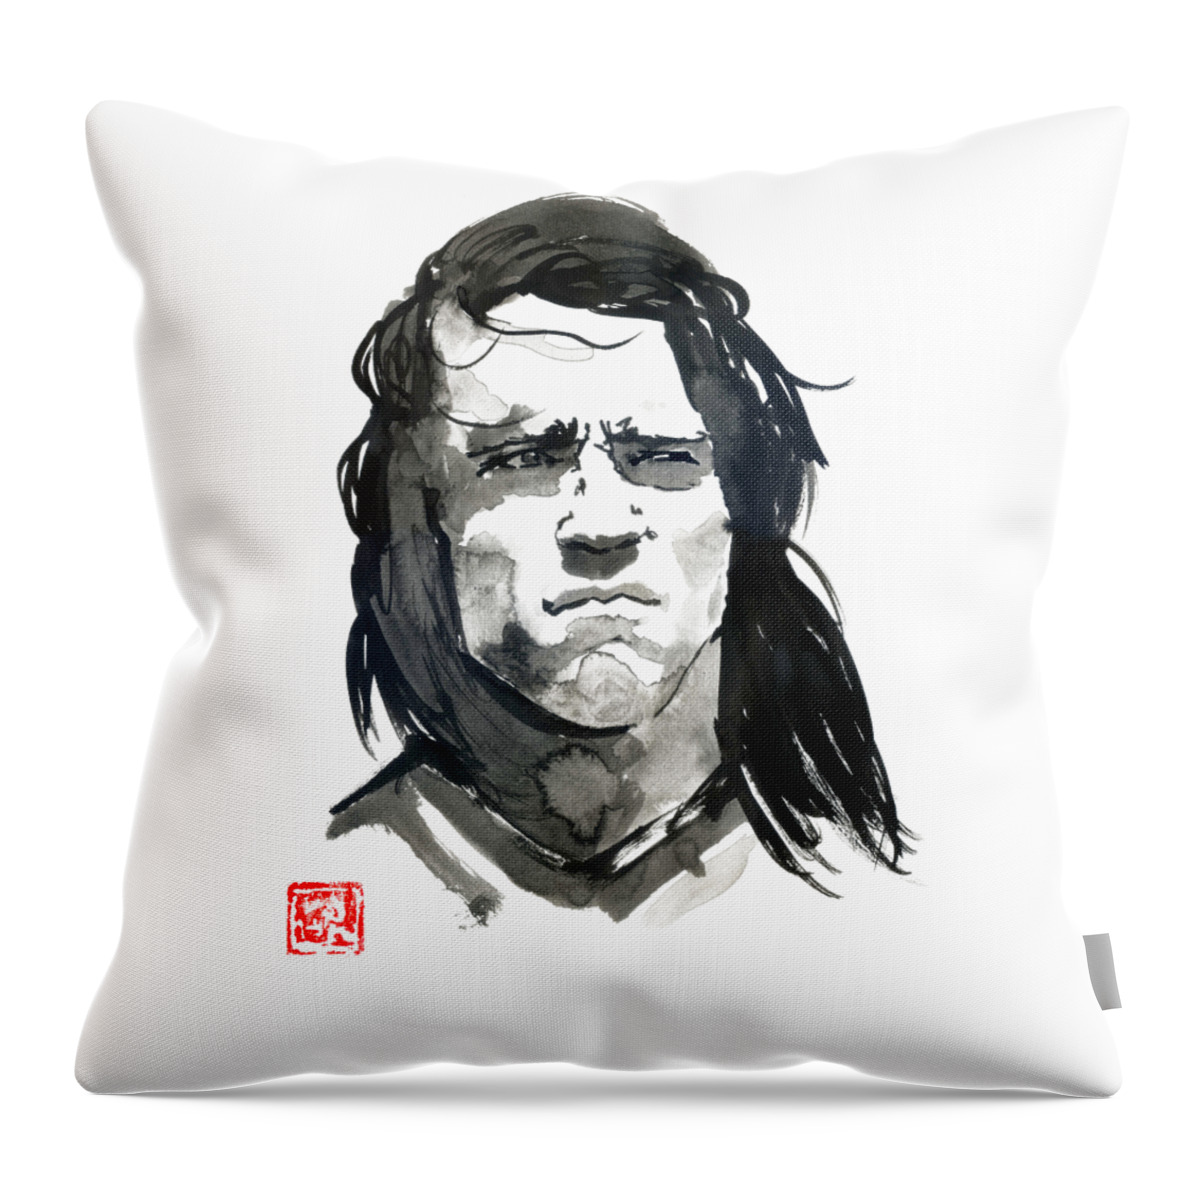 Sumie Throw Pillow featuring the drawing Spot Cat #1 by Pechane Sumie